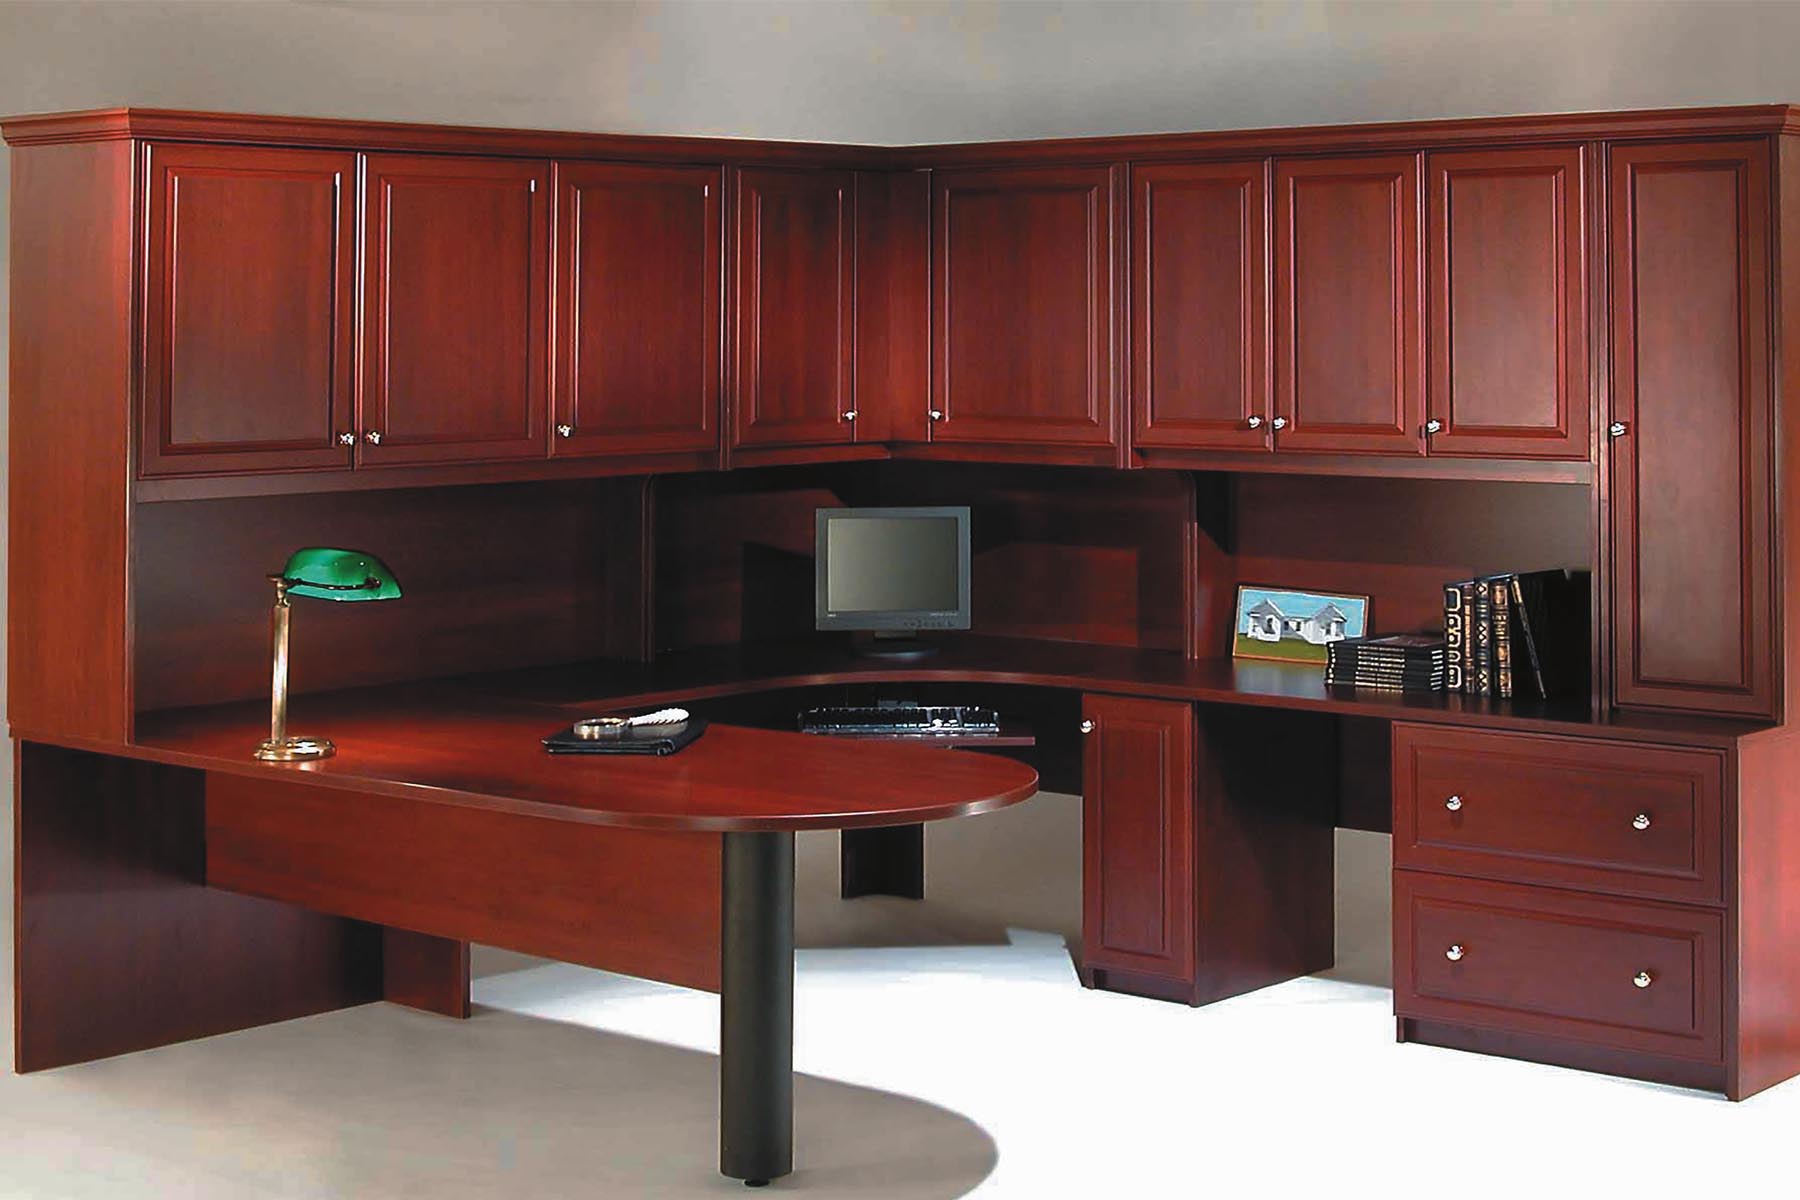 Custom home office finished with cherry cabinets and wrap around desk